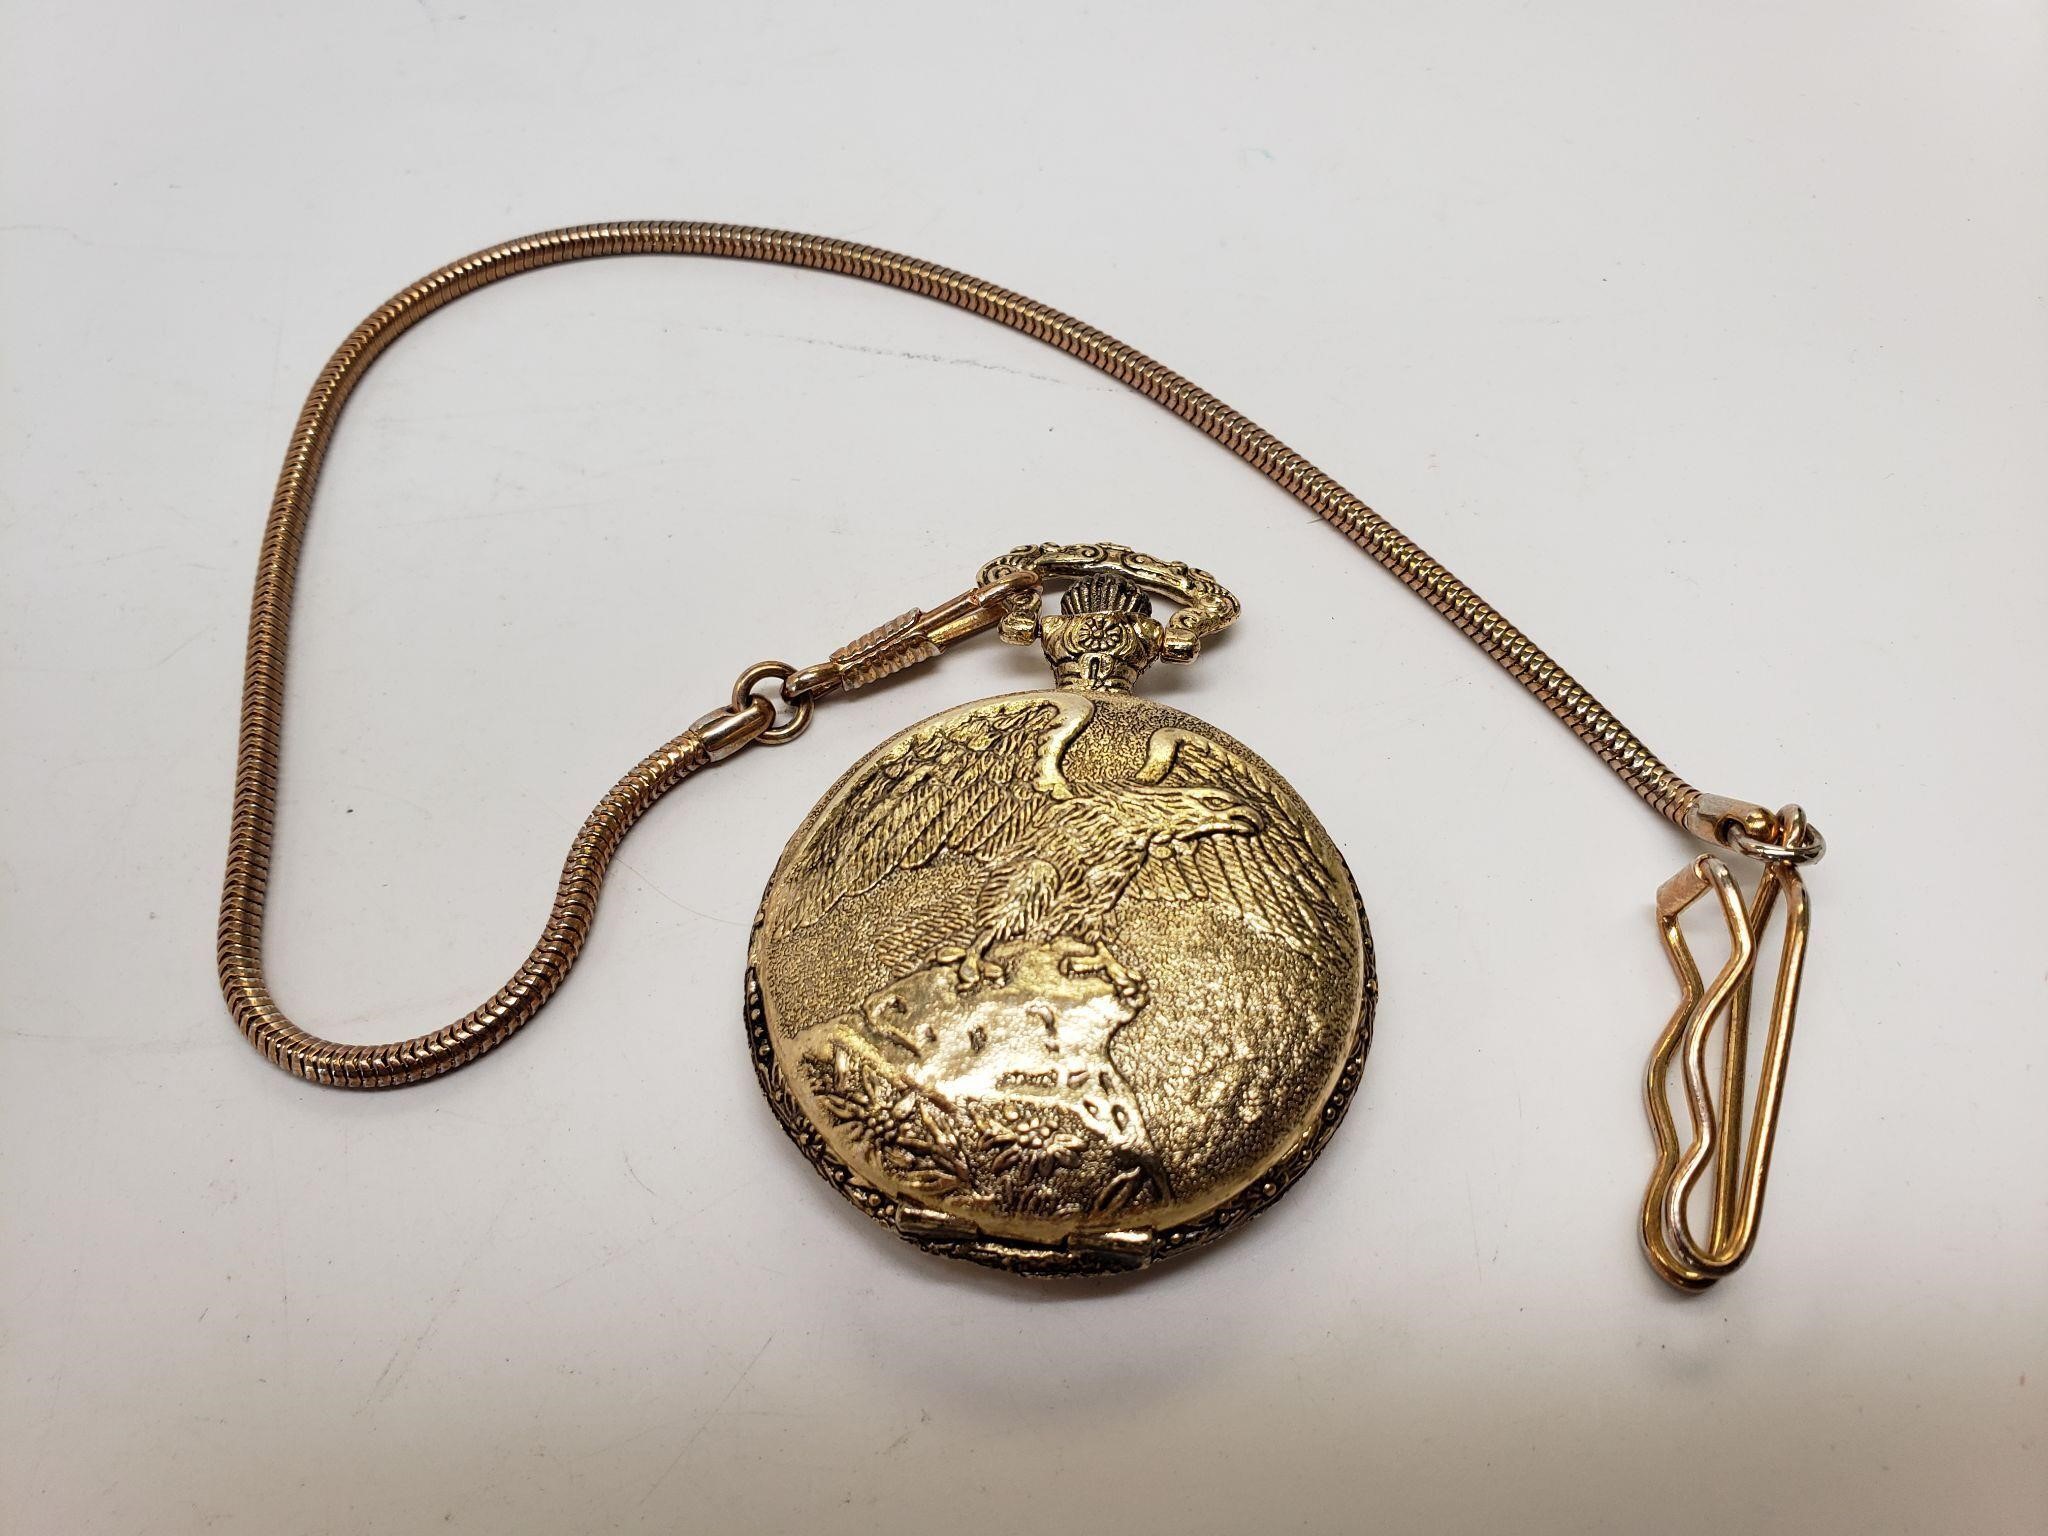 Eagle Pocket Watch and Chain